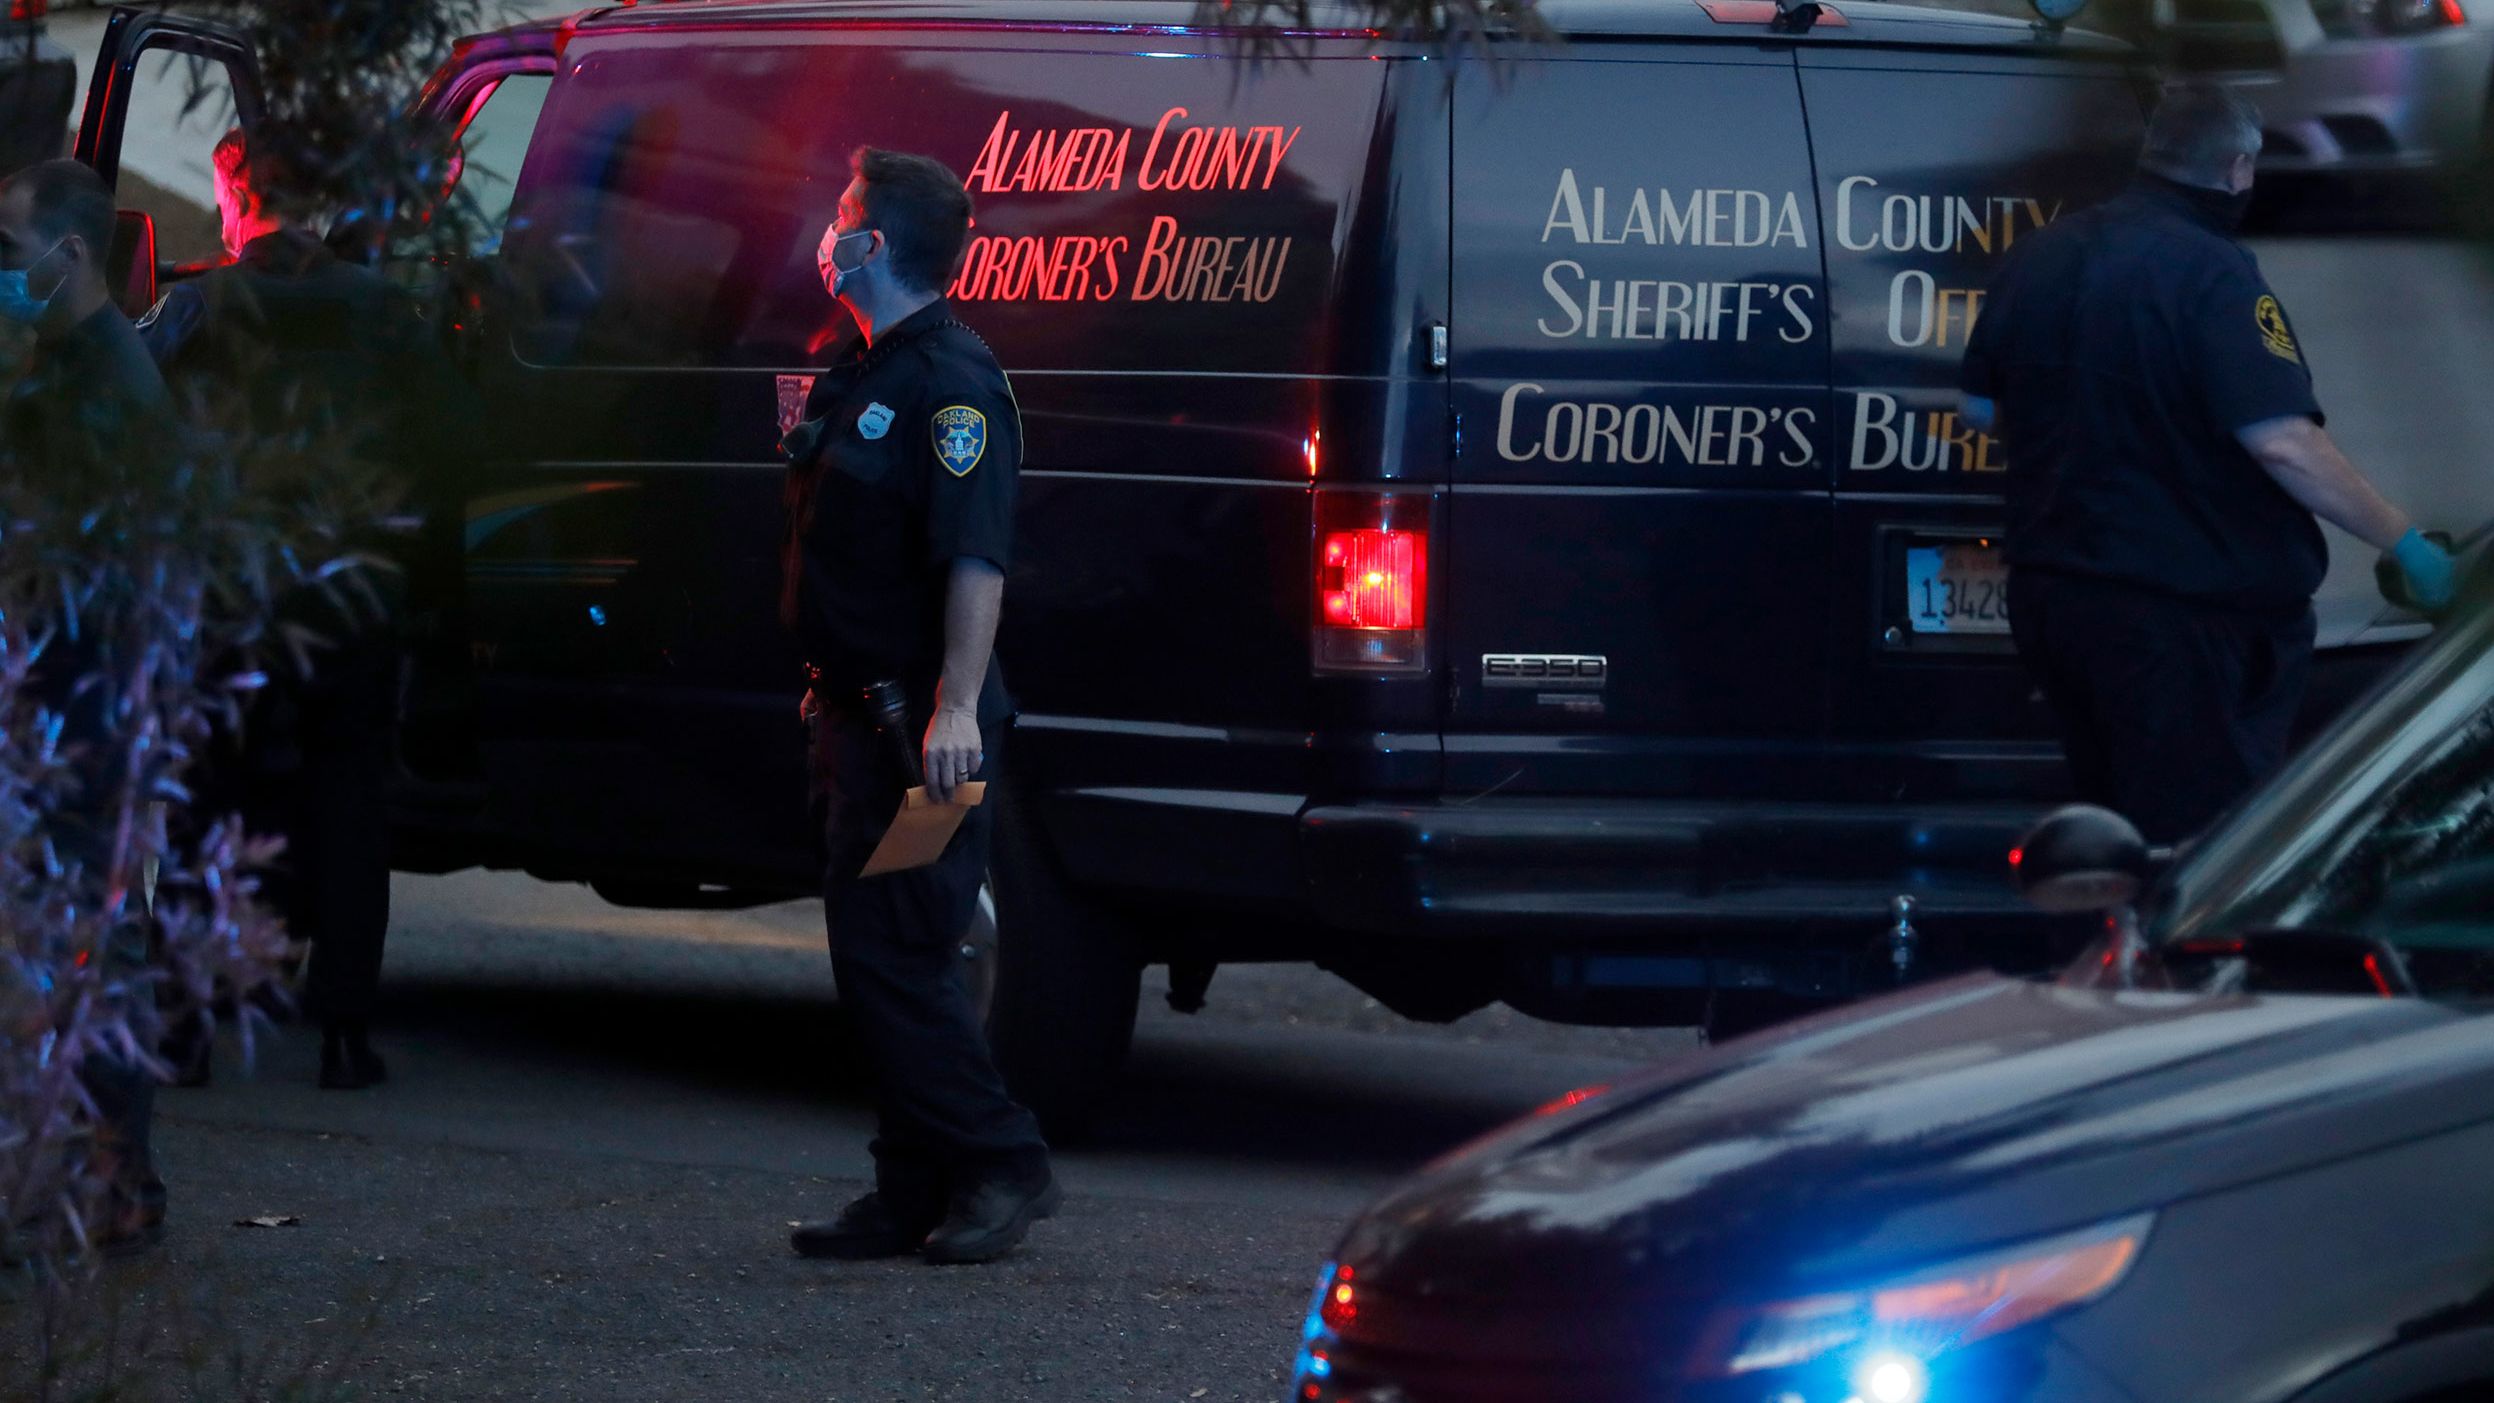 Deputies from the coroner's bureau of the Alameda County Sheriff's Office work a crime scene in Oakland, California, on May 16, 2021.